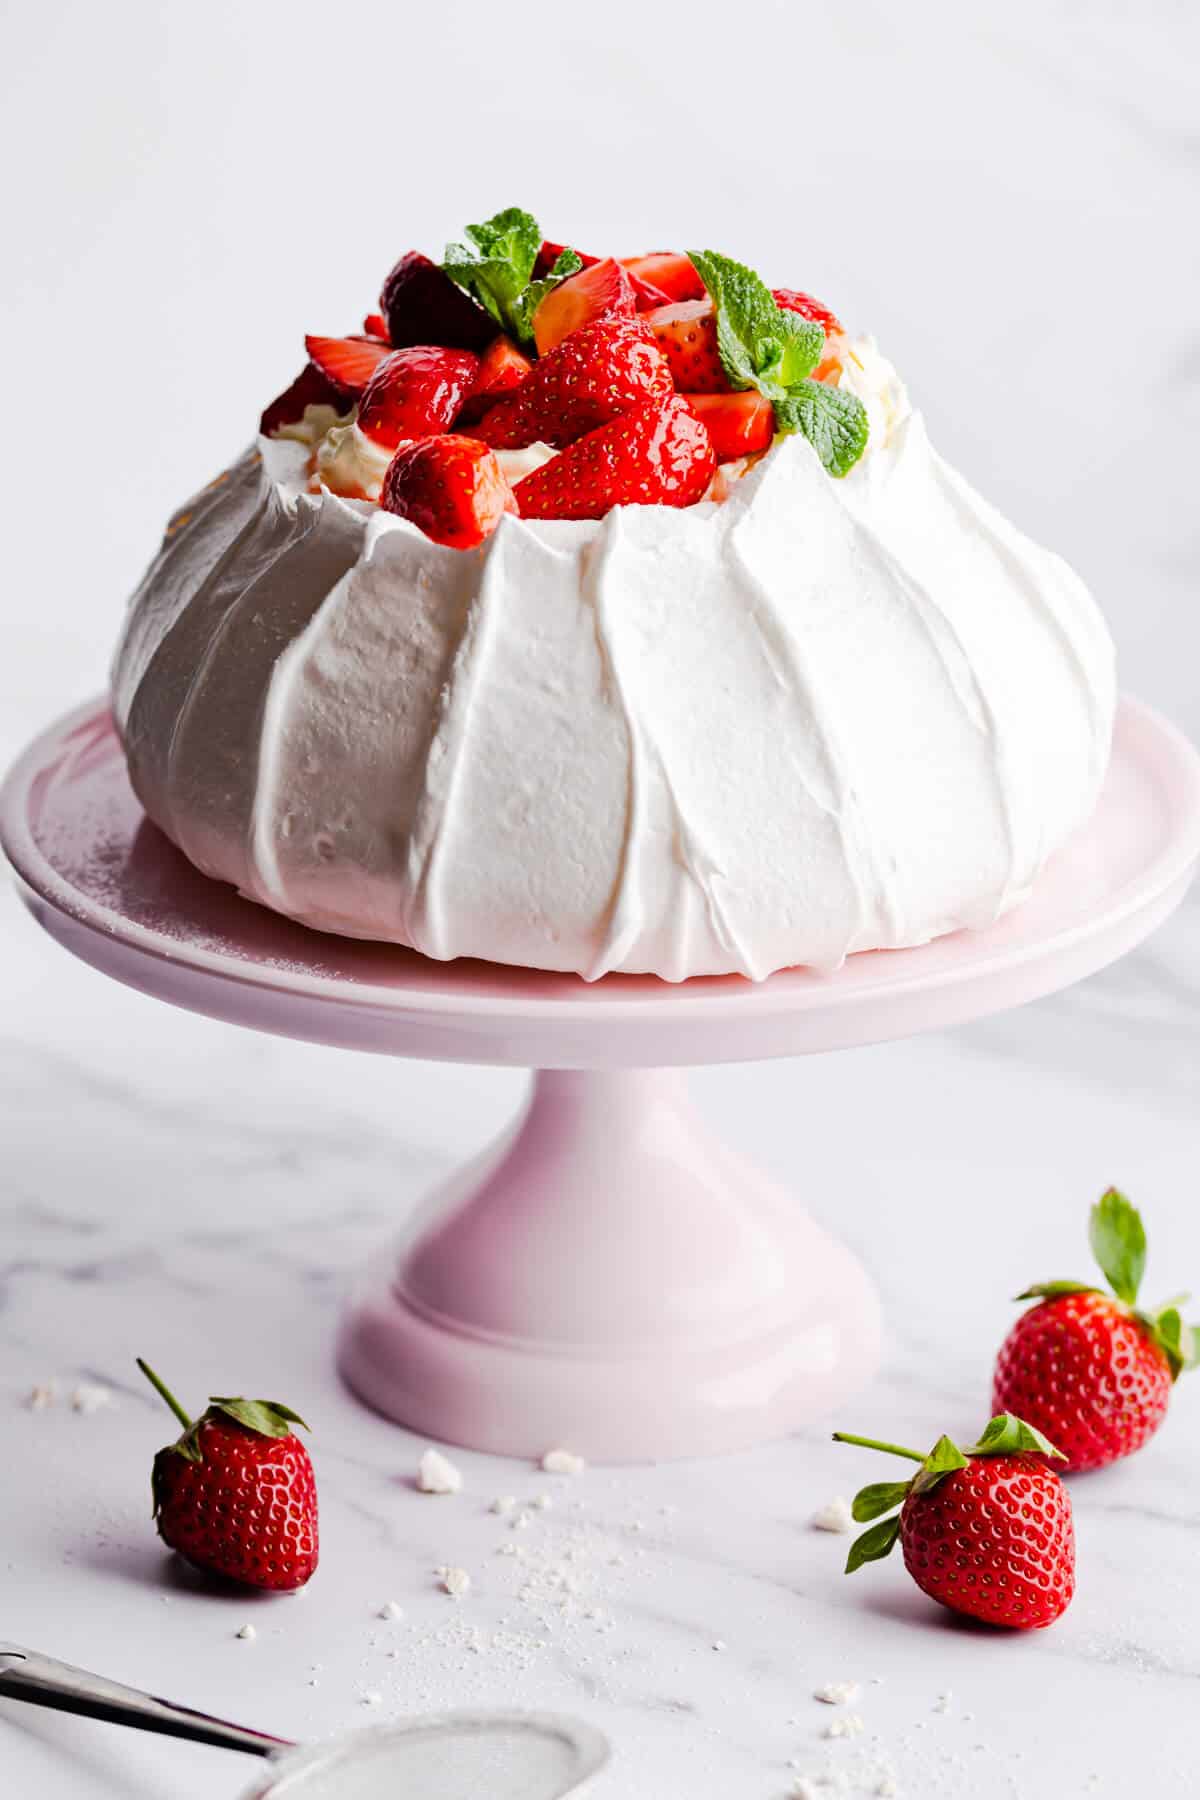 A cake stand with a strawberry pavlova on it, surrounded by fresh strawberries.